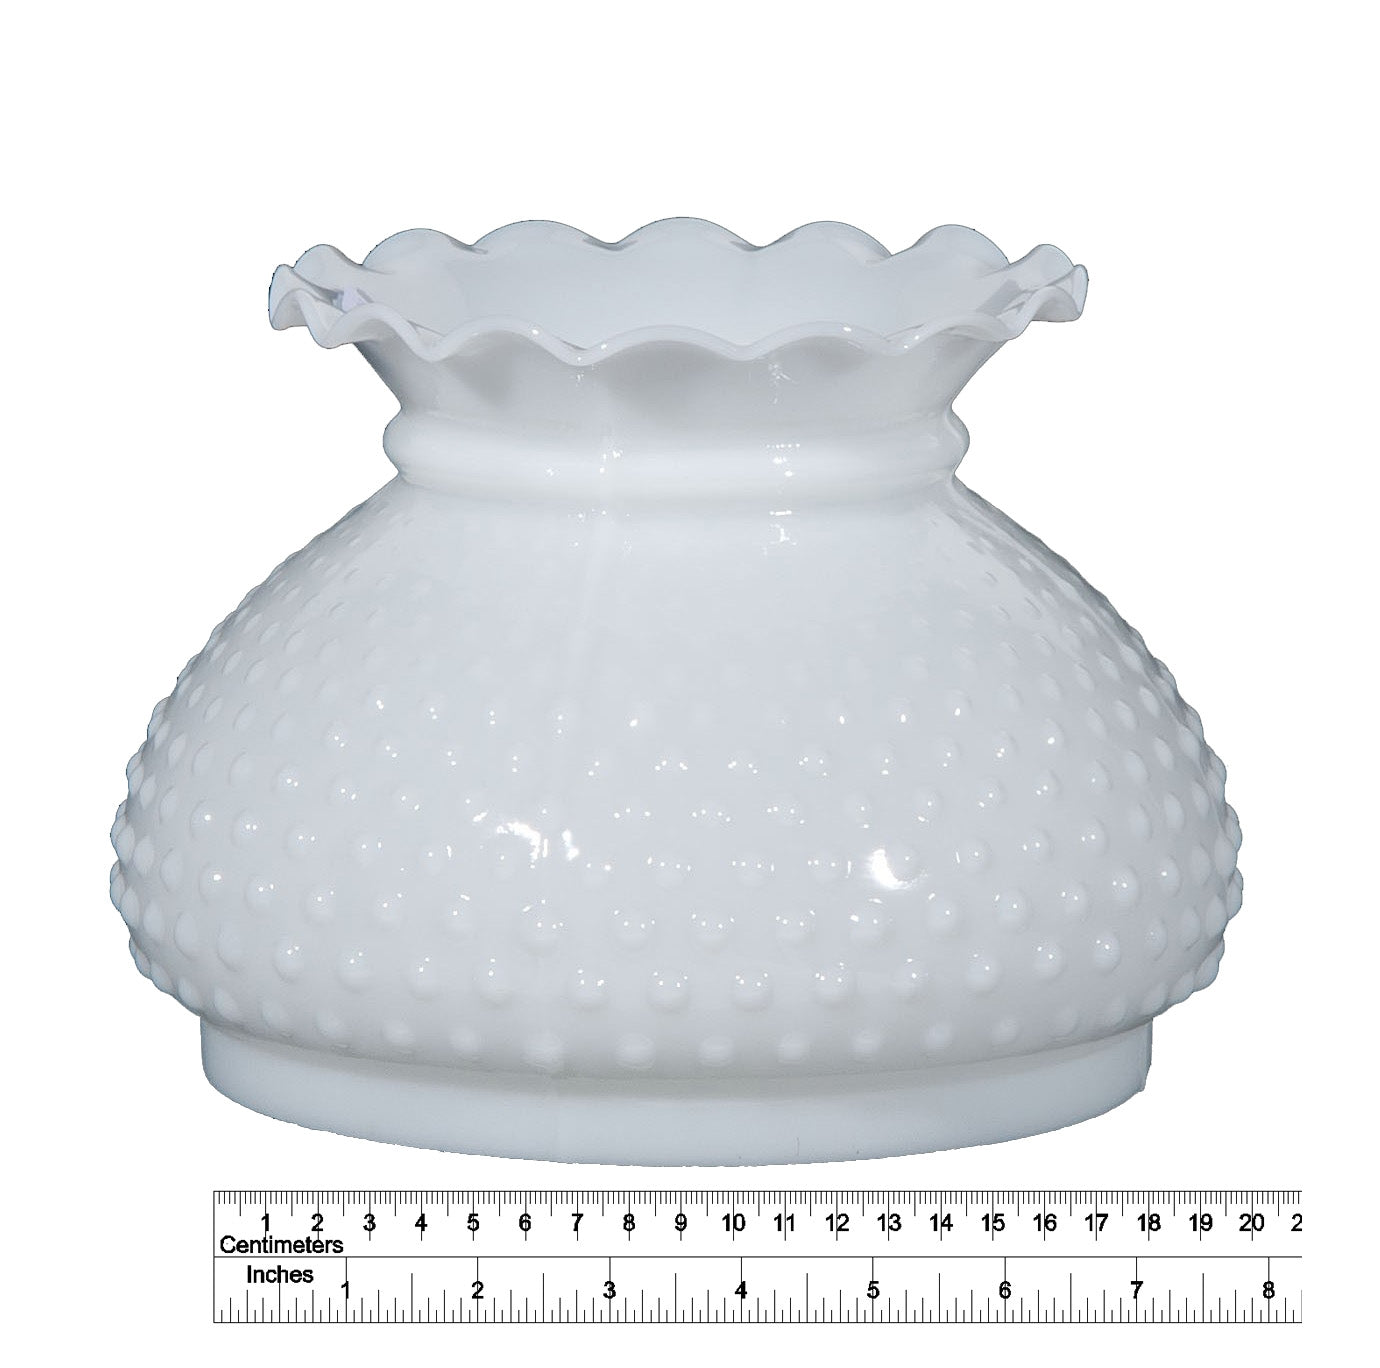 Cased Glass Hobnail Shade - Crimp Top, 7 inch fitter